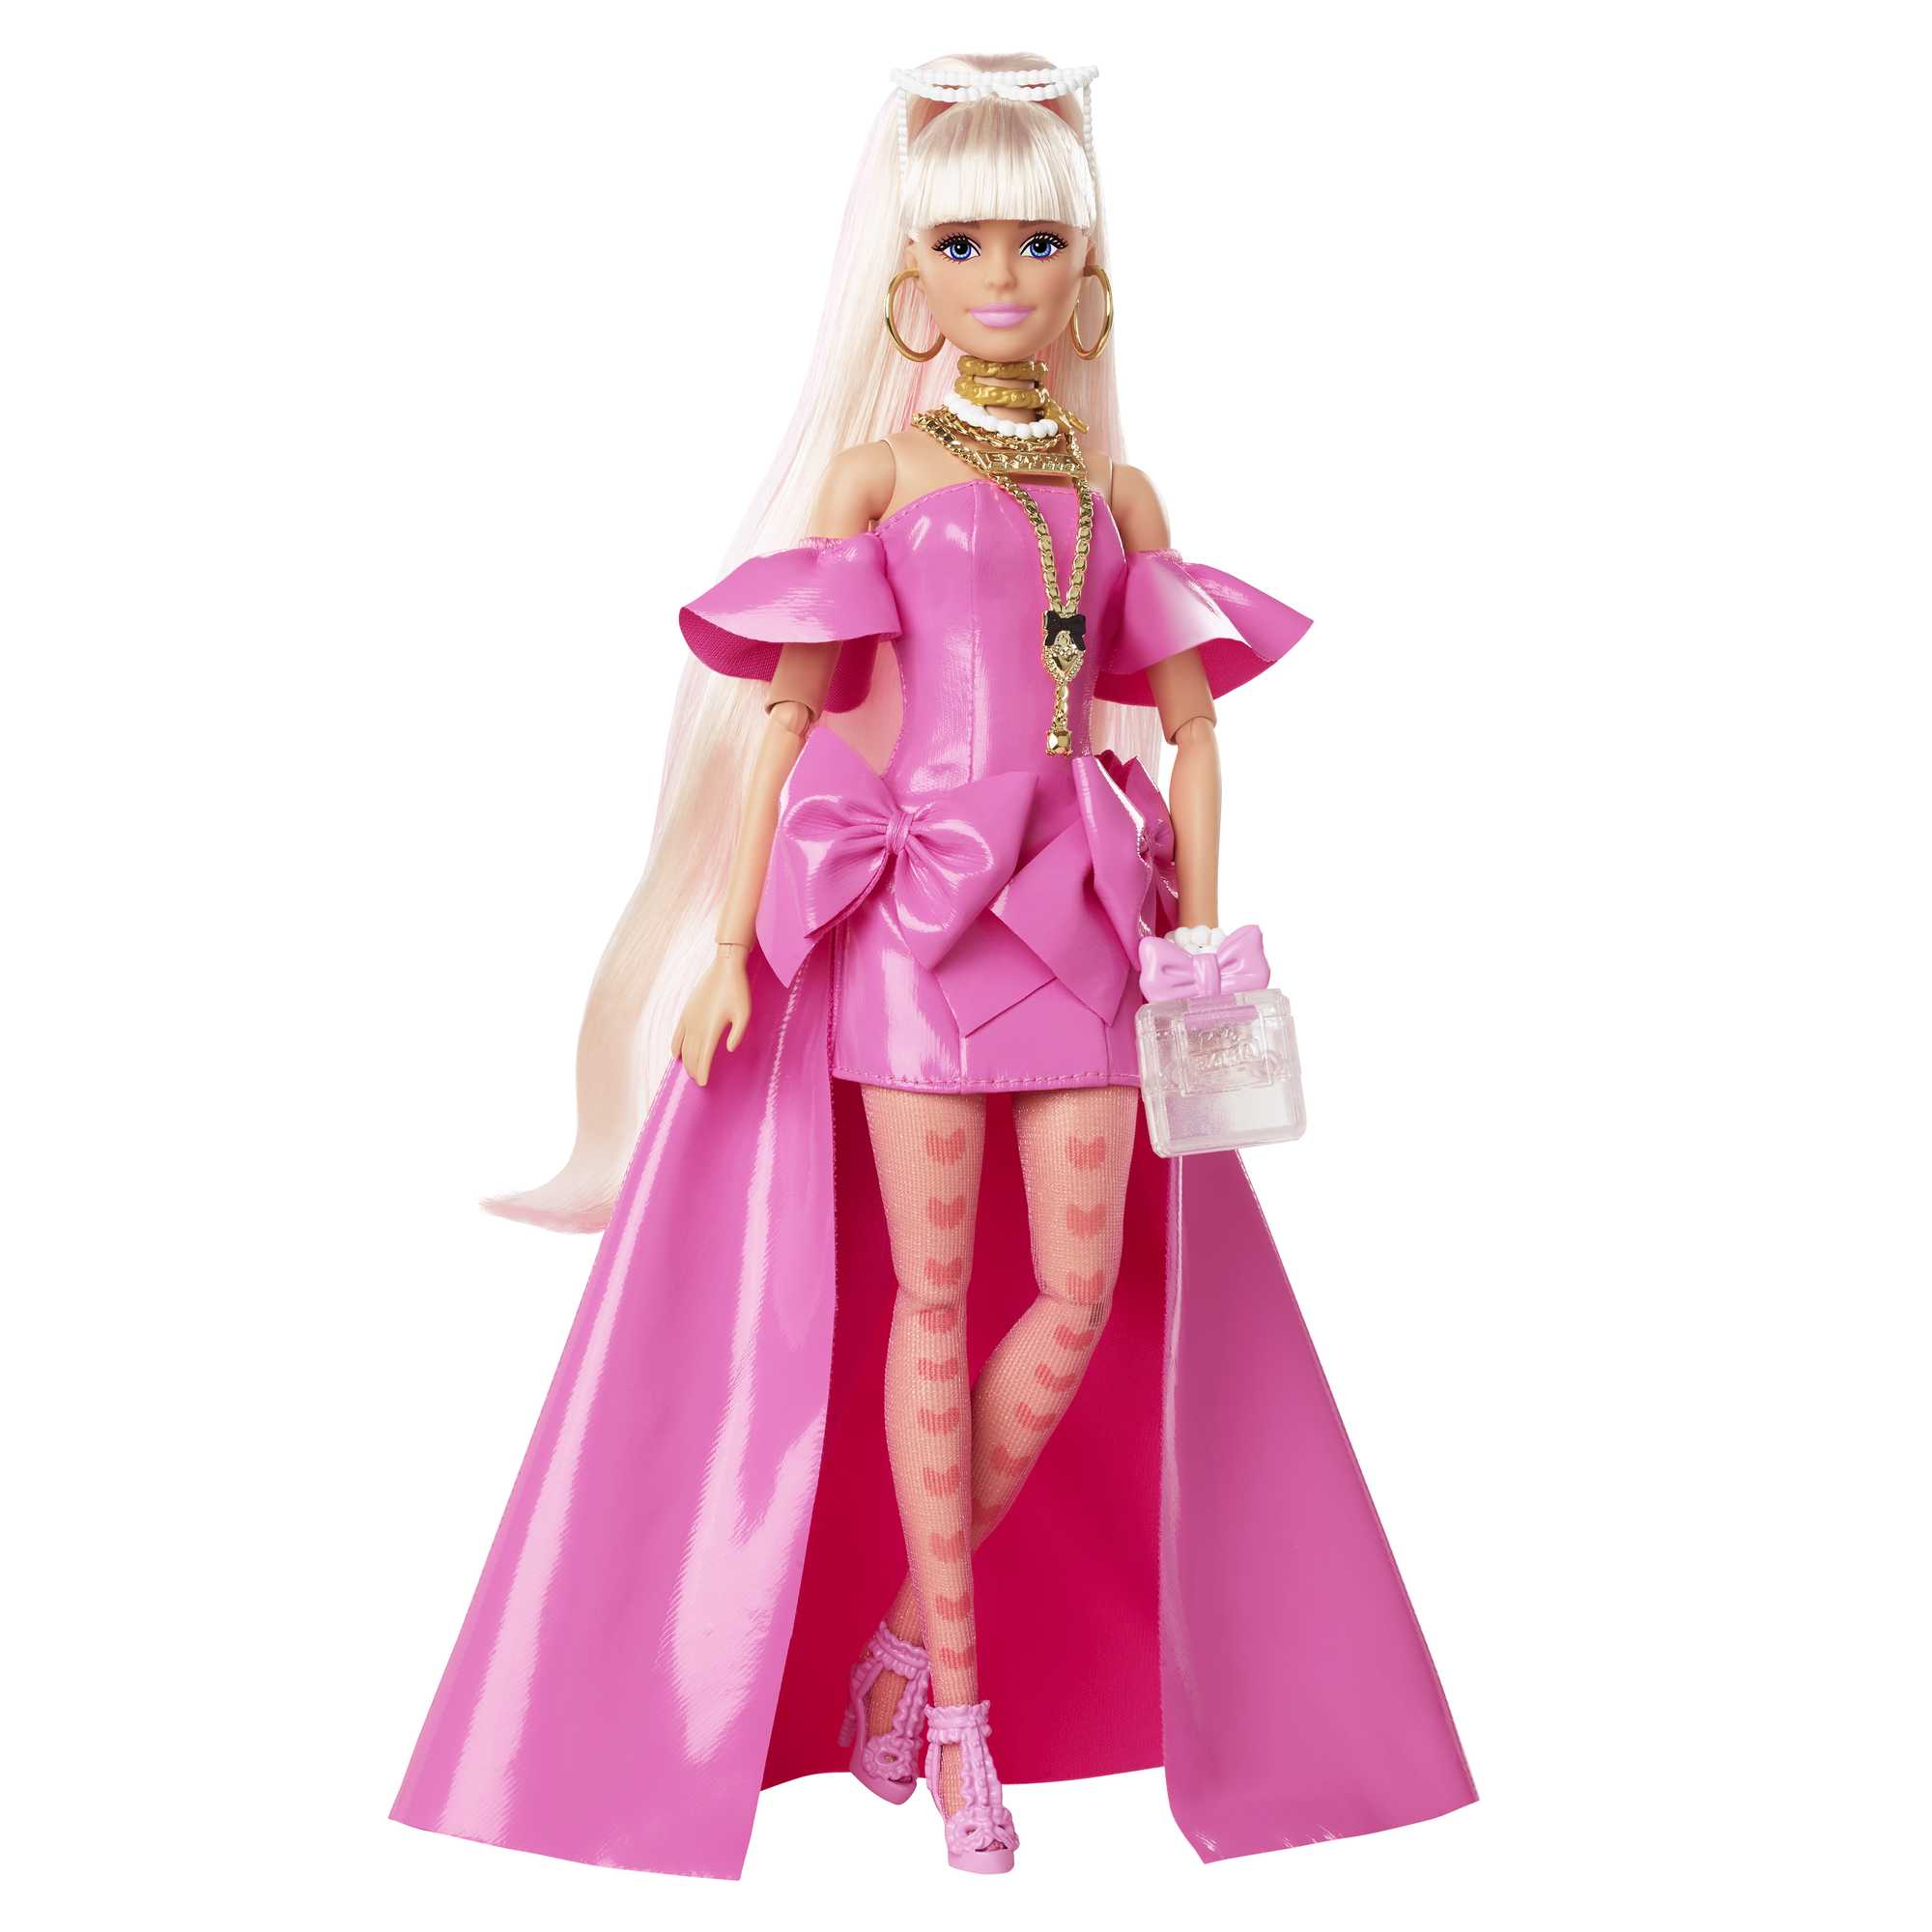 Barbie Extra Fancy Doll in Pink Glossy High-Low Gown, with Pet Puppy,  Extra-Long Hair & Accessories, Flexible Joints, Toy for 3 Year Olds & Up